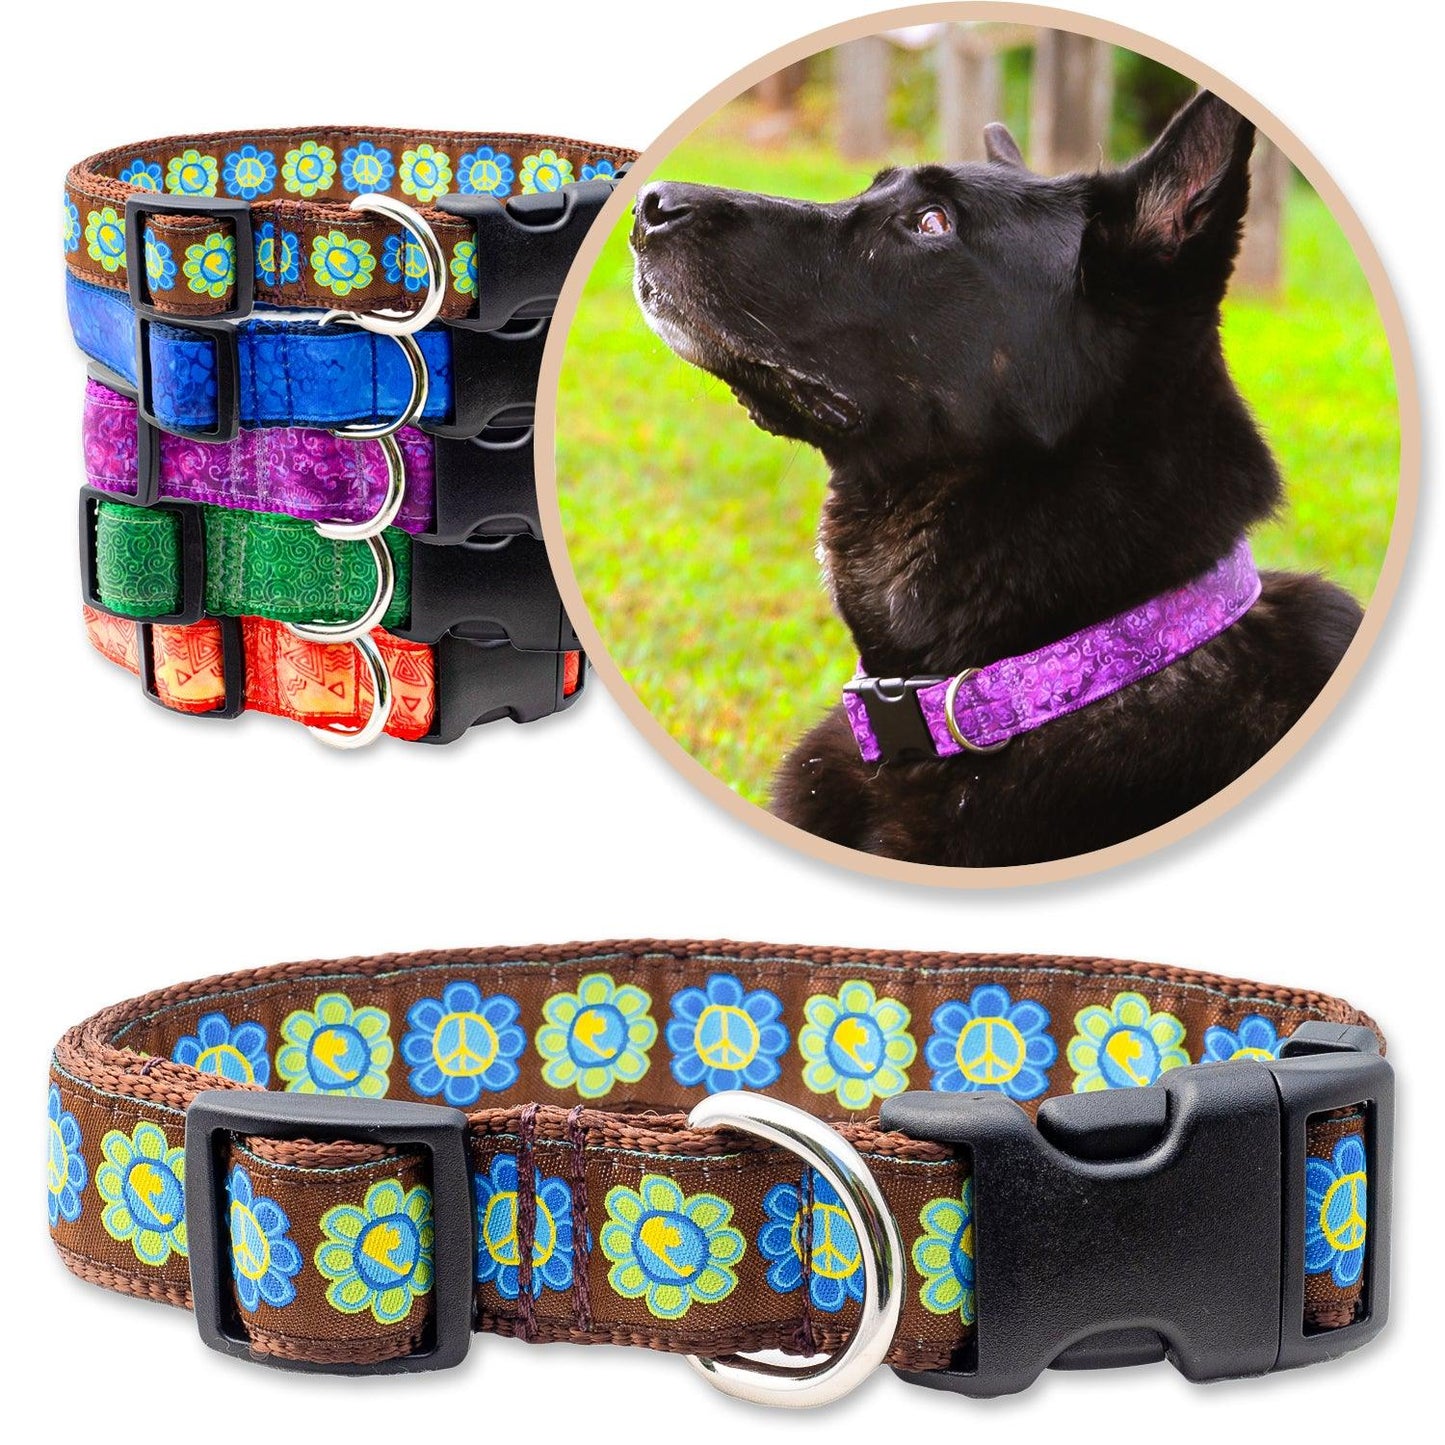 Brown dog collars with flowers shown with a black dog